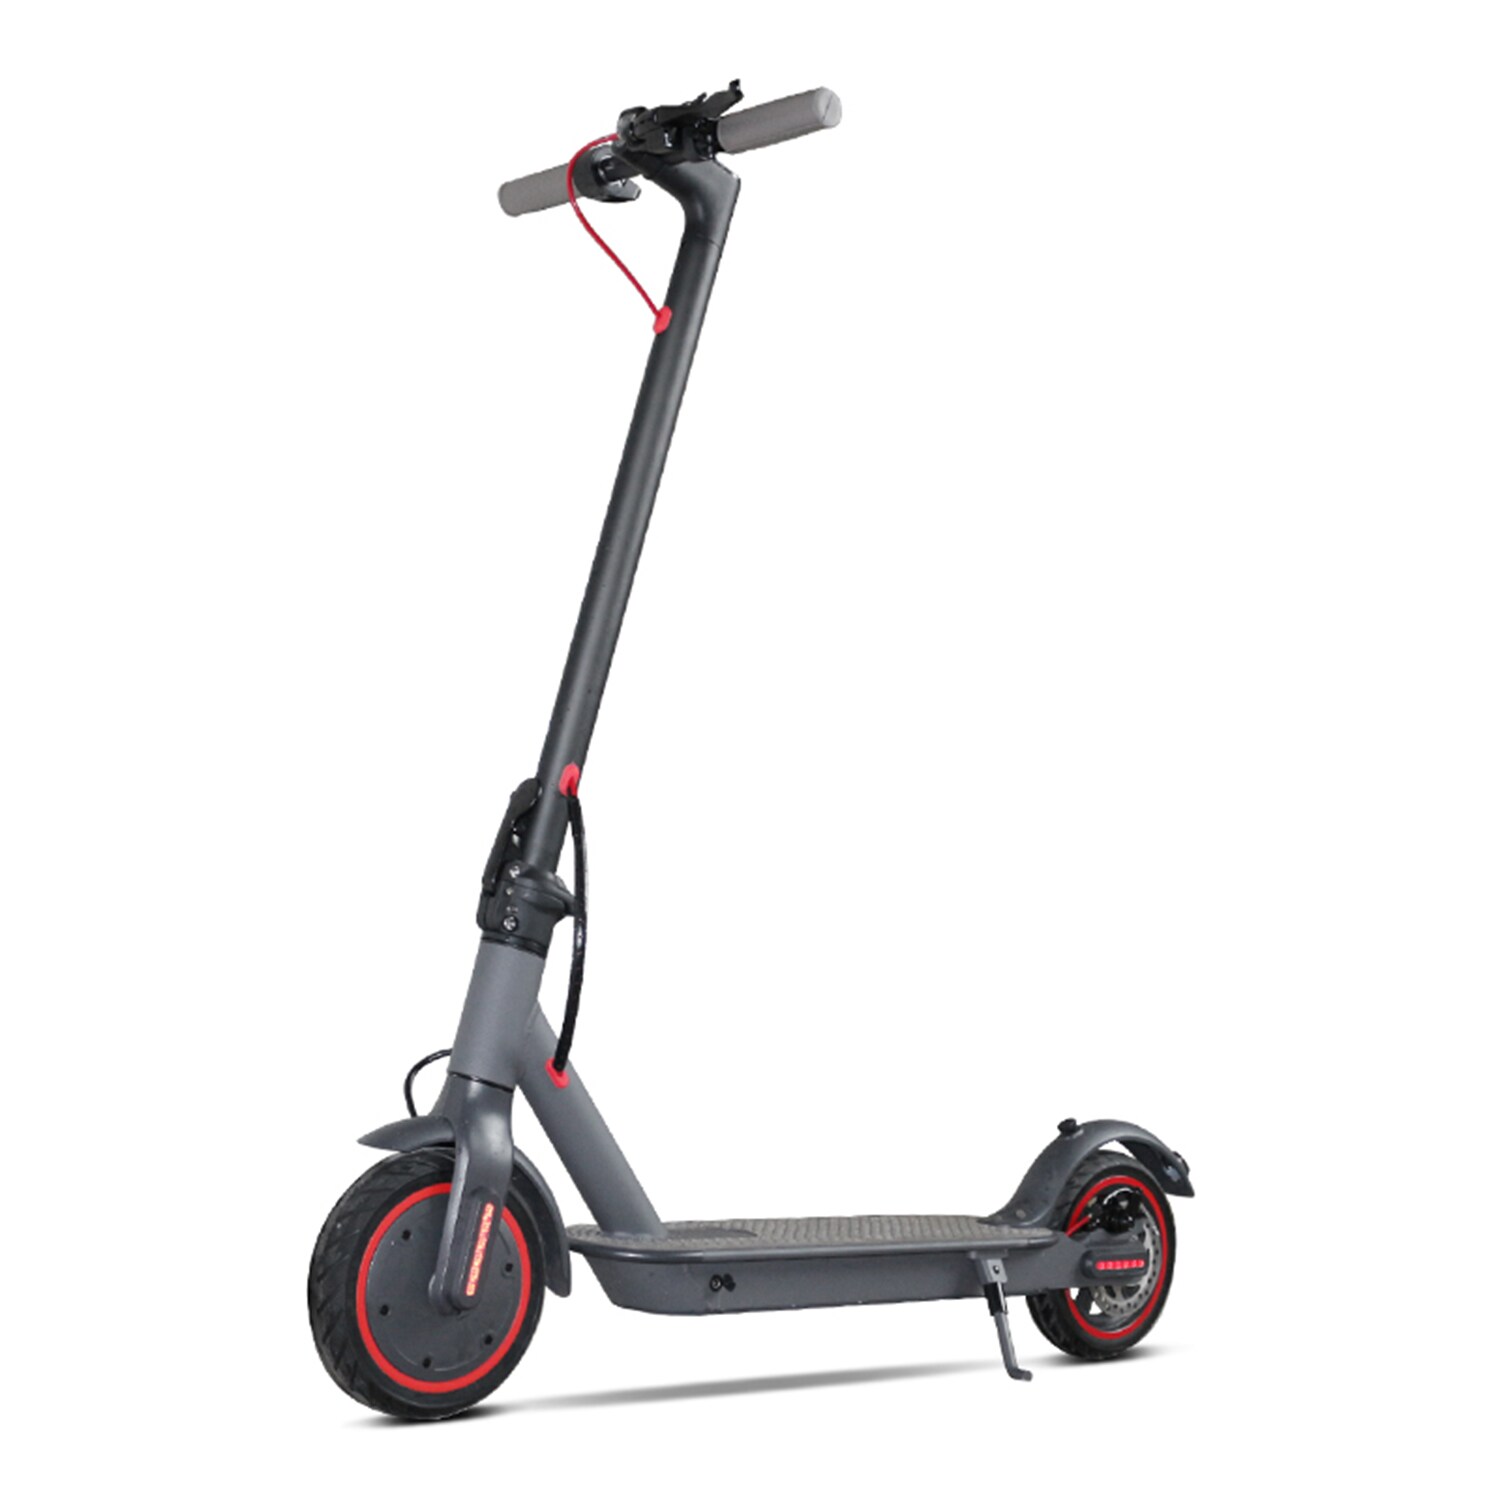 SINOFURN 8.5Inch 350W Foldable Electric Scooter For Adult City Ride Commute E-scooter in the Scooters at Lowes.com